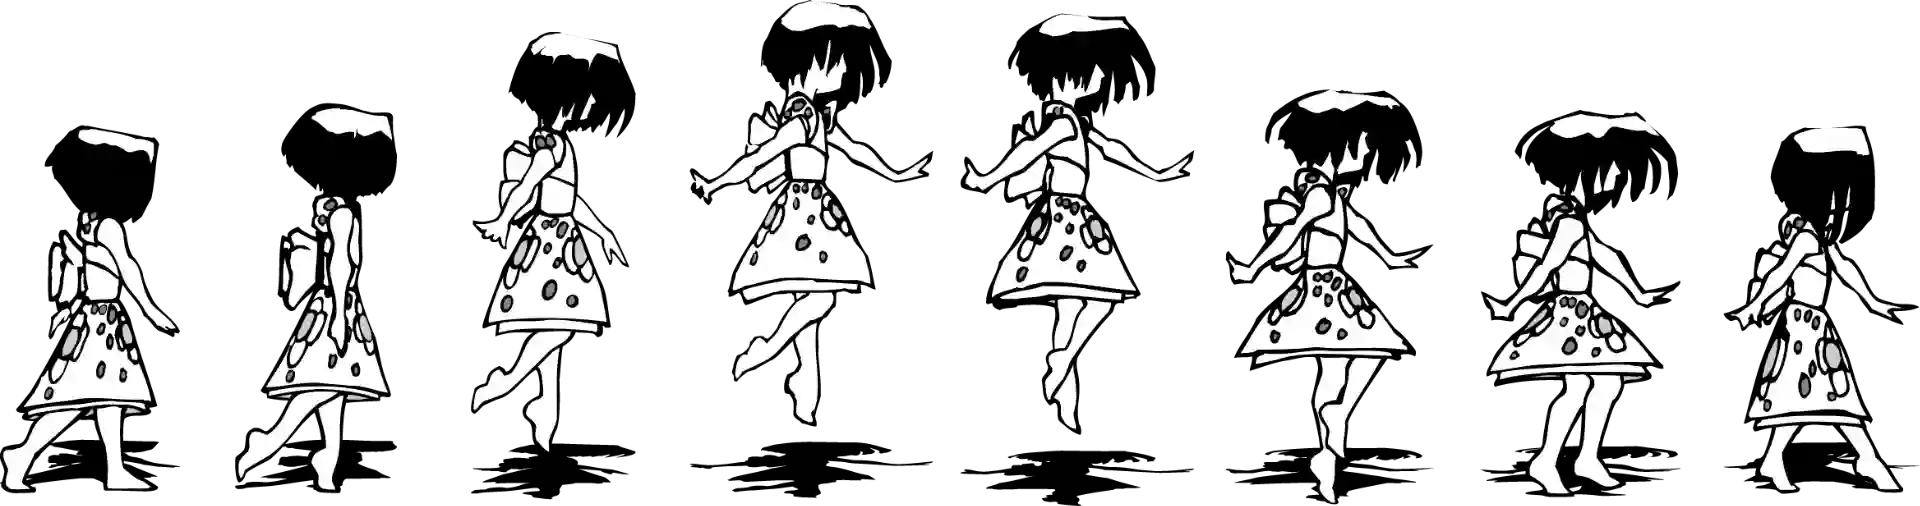 Individual frames of the animated character